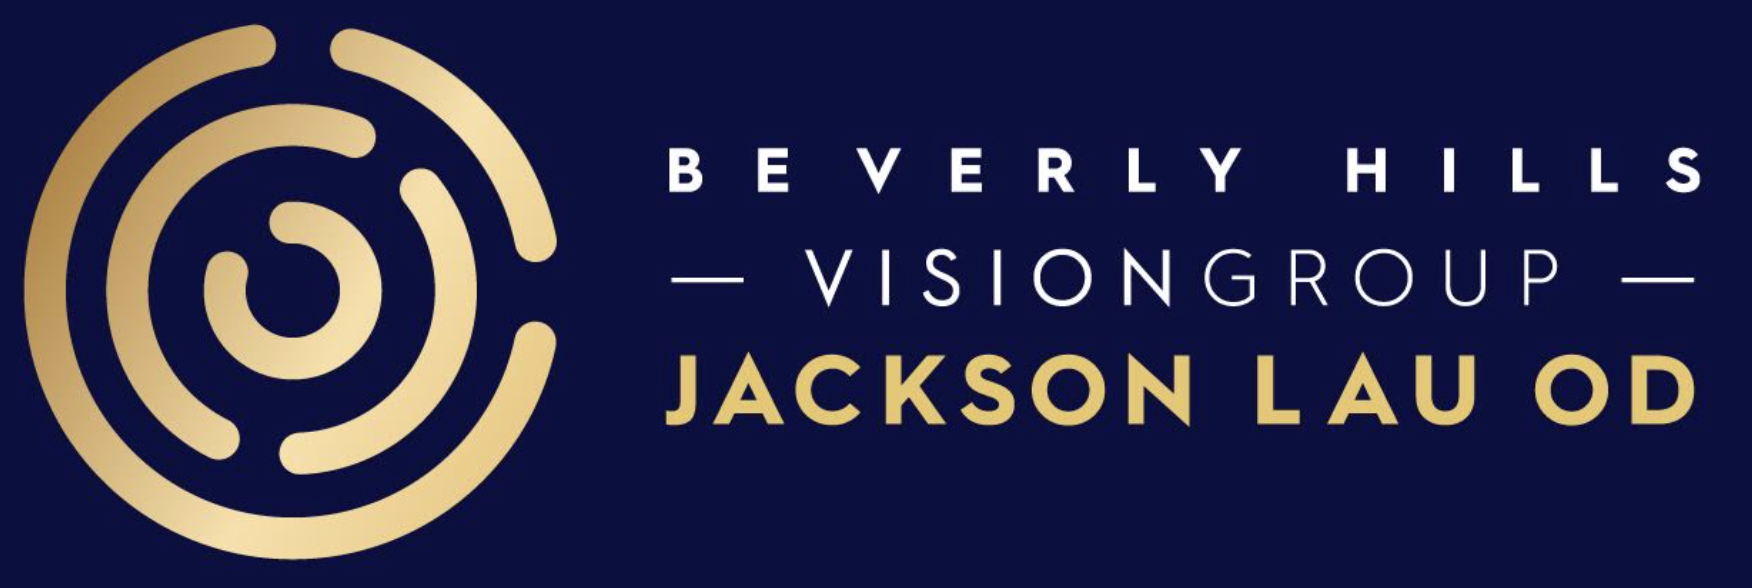 Optometrist, Myopia Management Center & Scleral Lens Clinic in Beverly Hills